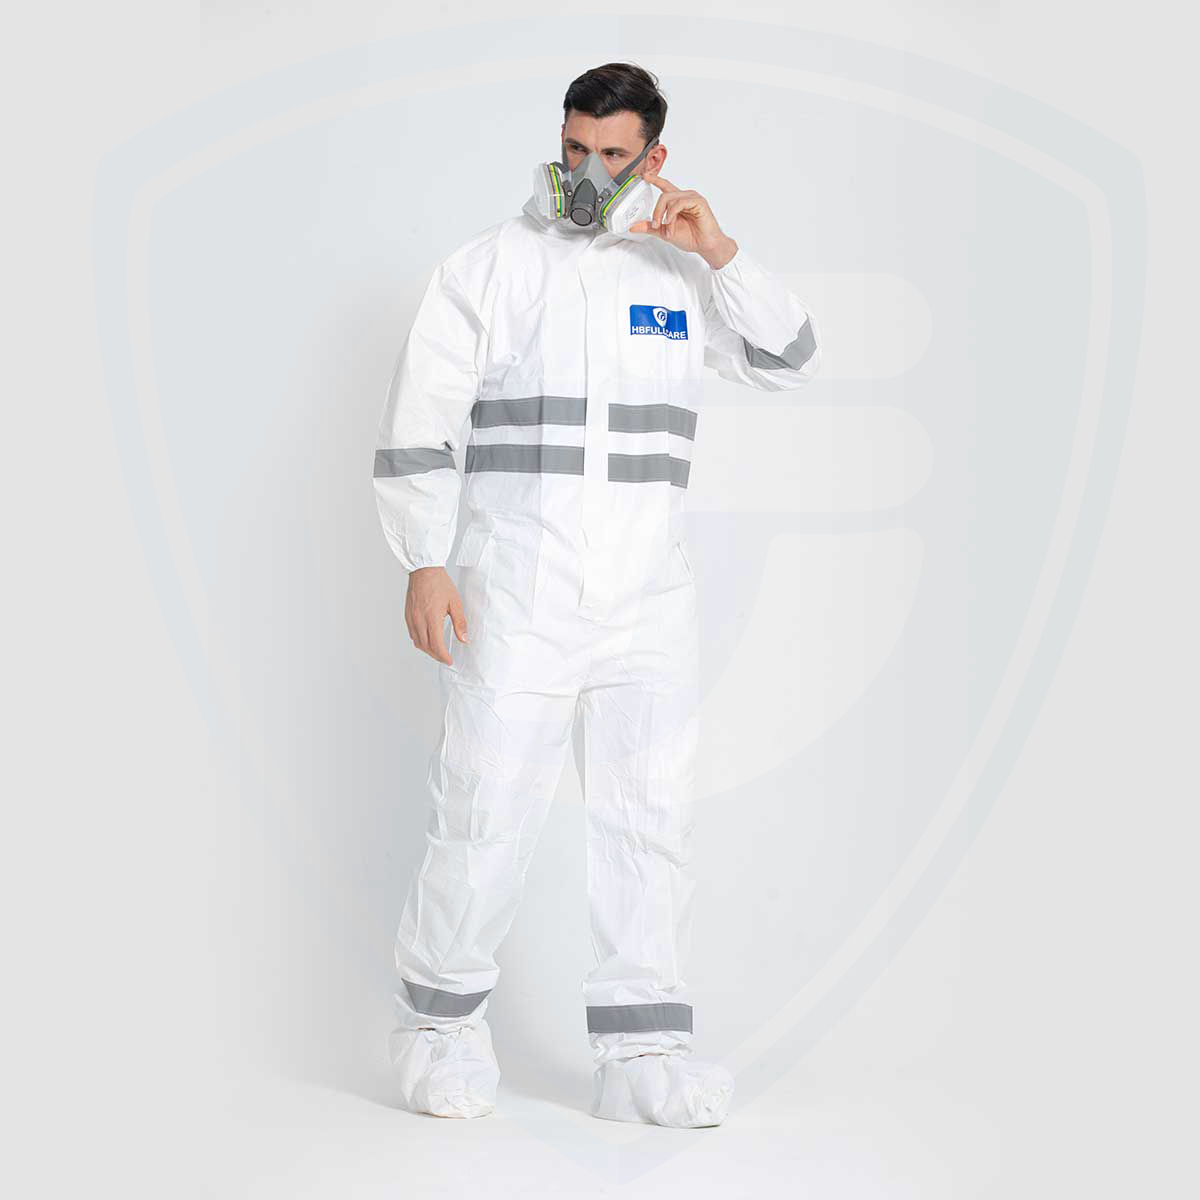 Type 5/6 Hooded Disposable Coveralls with Reflective Tape